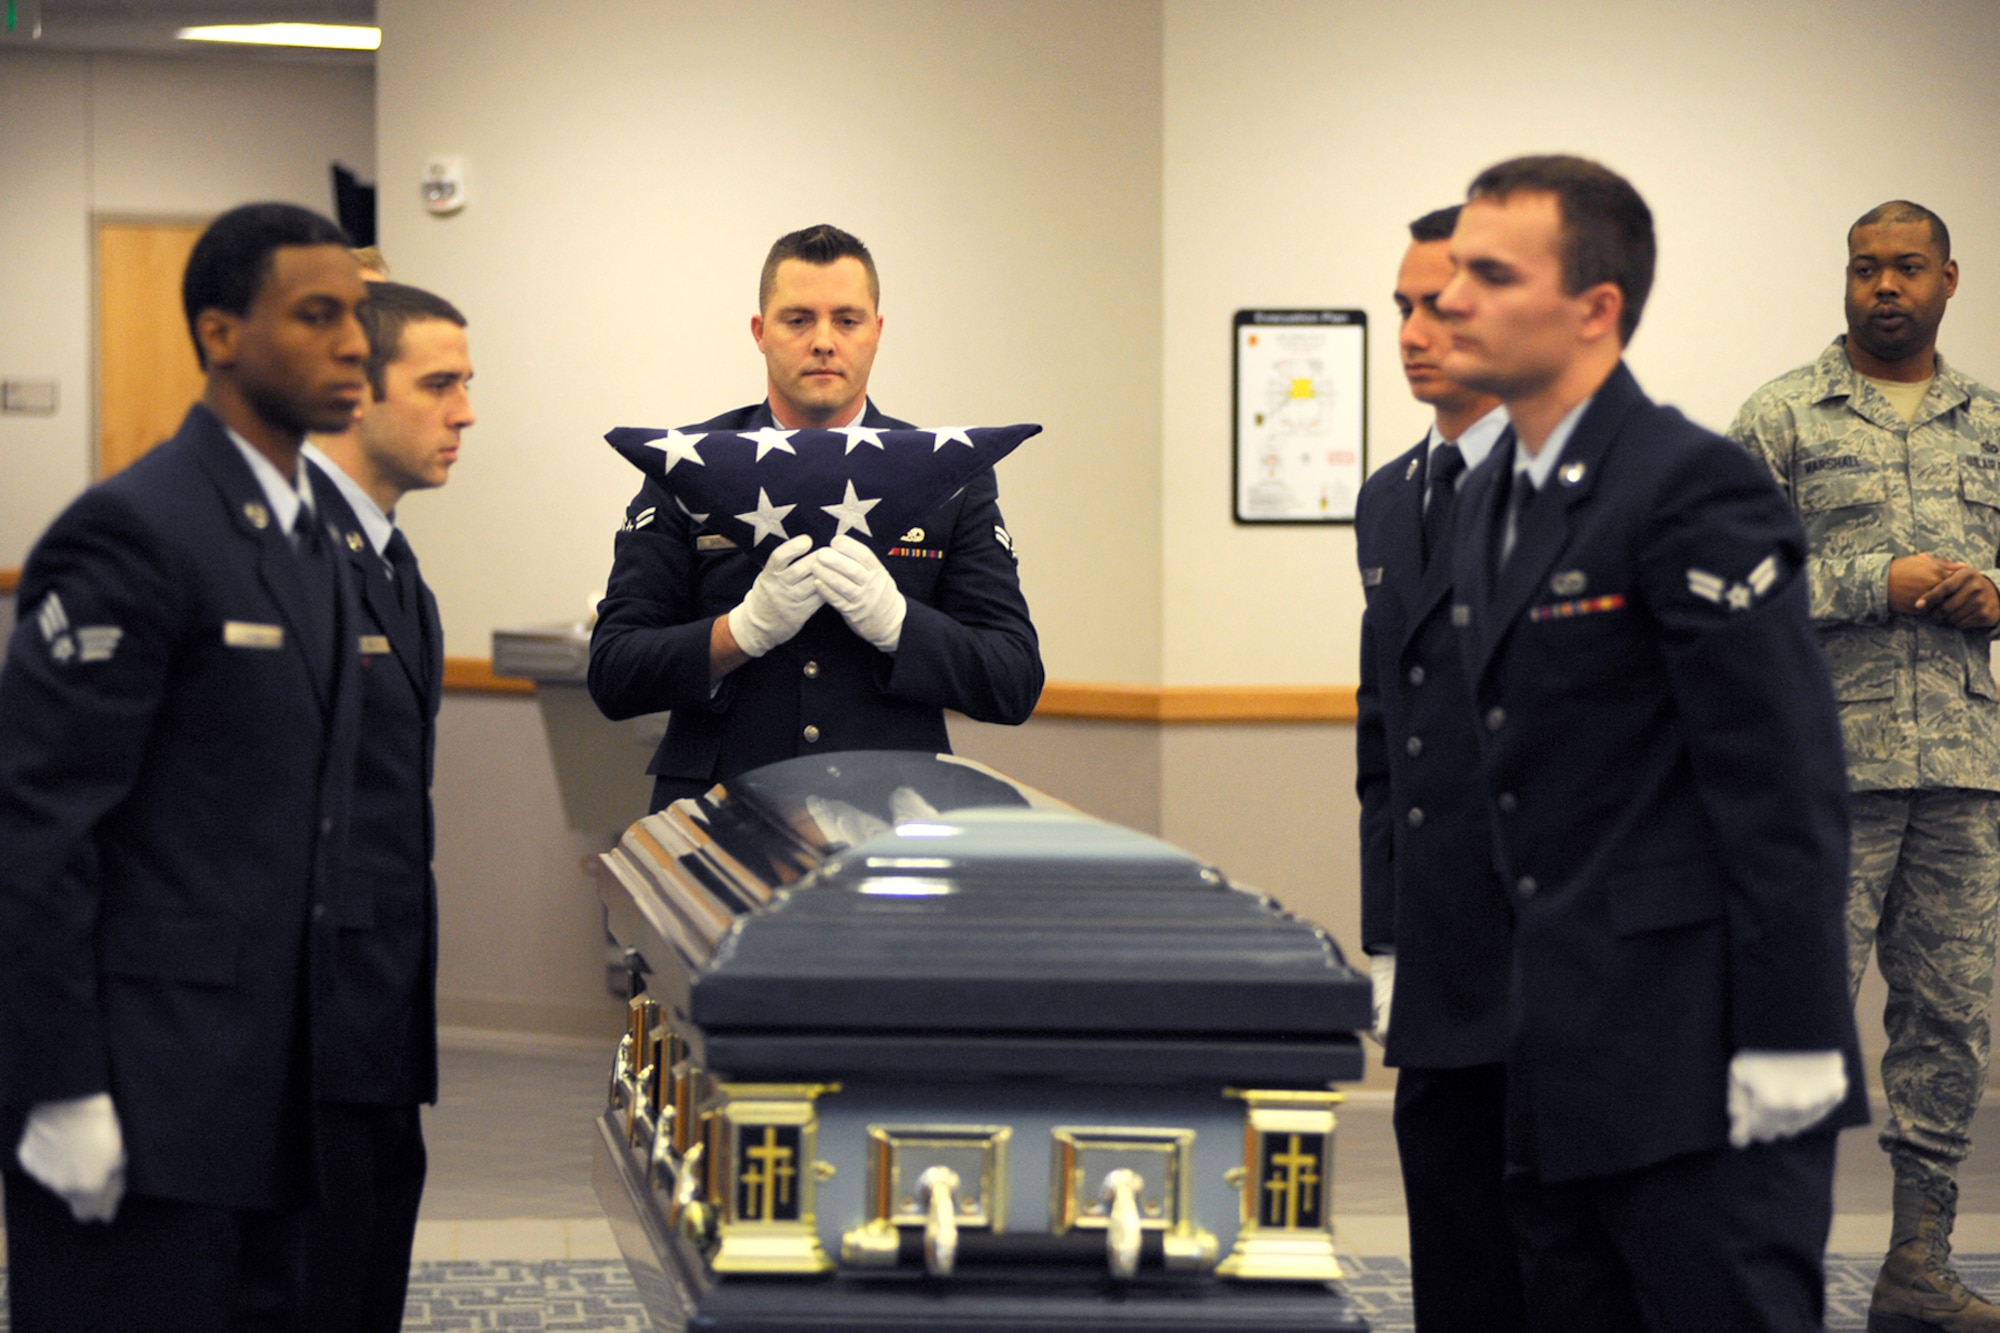 Airman 1st Class Shane Shaltry holds the U.S. Flag after it is folded over a casket by members of the 127th Wing Honor Guard at Selfridge Air National Guard Base, Mich., Feb. 10, 2012. In addition to the empty casket, volunteers acted as “grieving family members” to assist honor guard trainees learn the appropriate ceremonial honors to be rendered at a veteran’s funeral. The honor guard held a training session to qualify six new Airmen to serve as members of the unit. (U.S. Air Force photo by John S. Swanson)